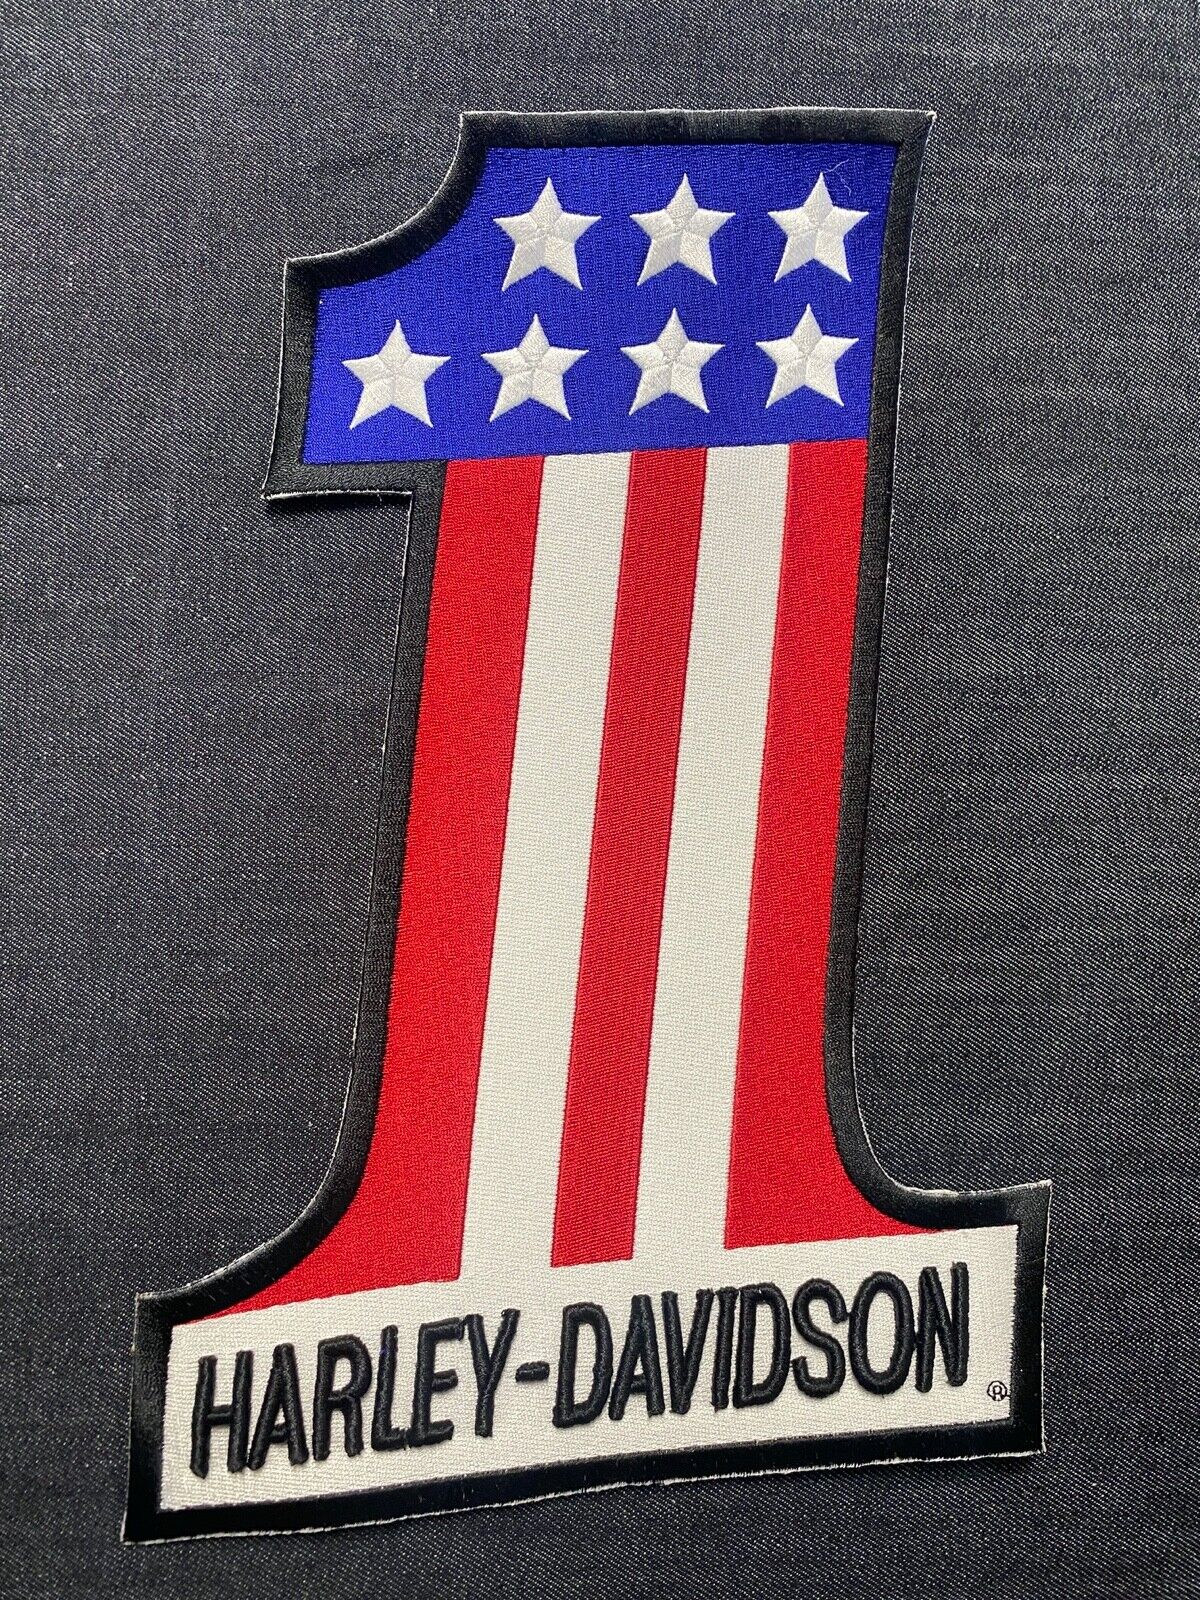 100% Authentic Rare Harley Davidson #1 Evel Knievel Large Patch Iron on or Sew